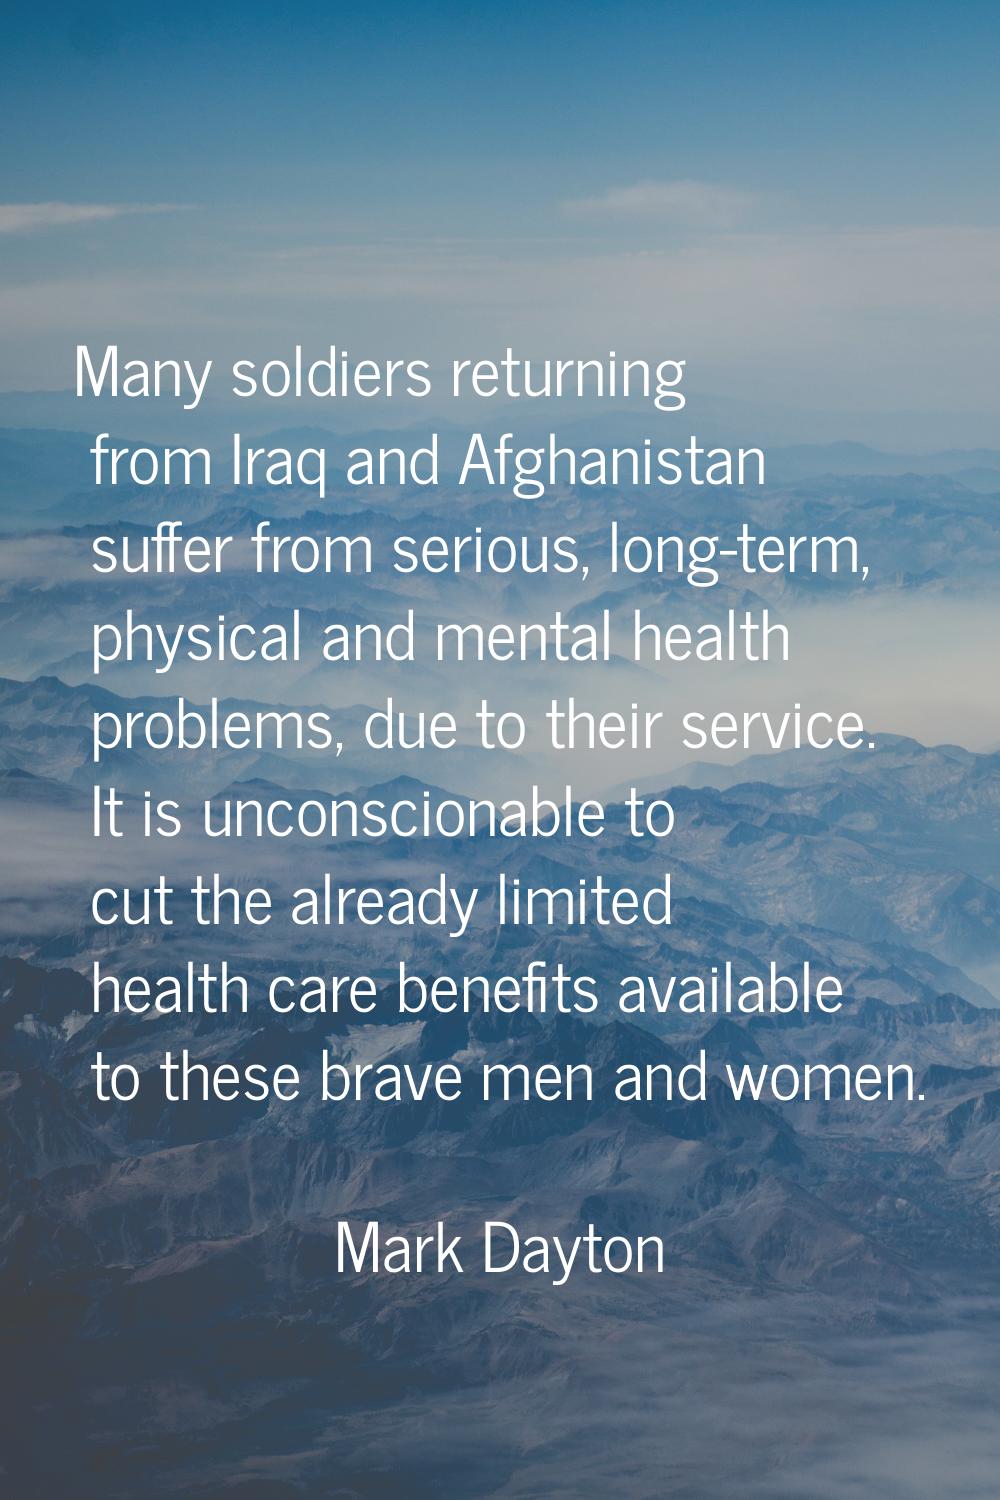 Many soldiers returning from Iraq and Afghanistan suffer from serious, long-term, physical and ment